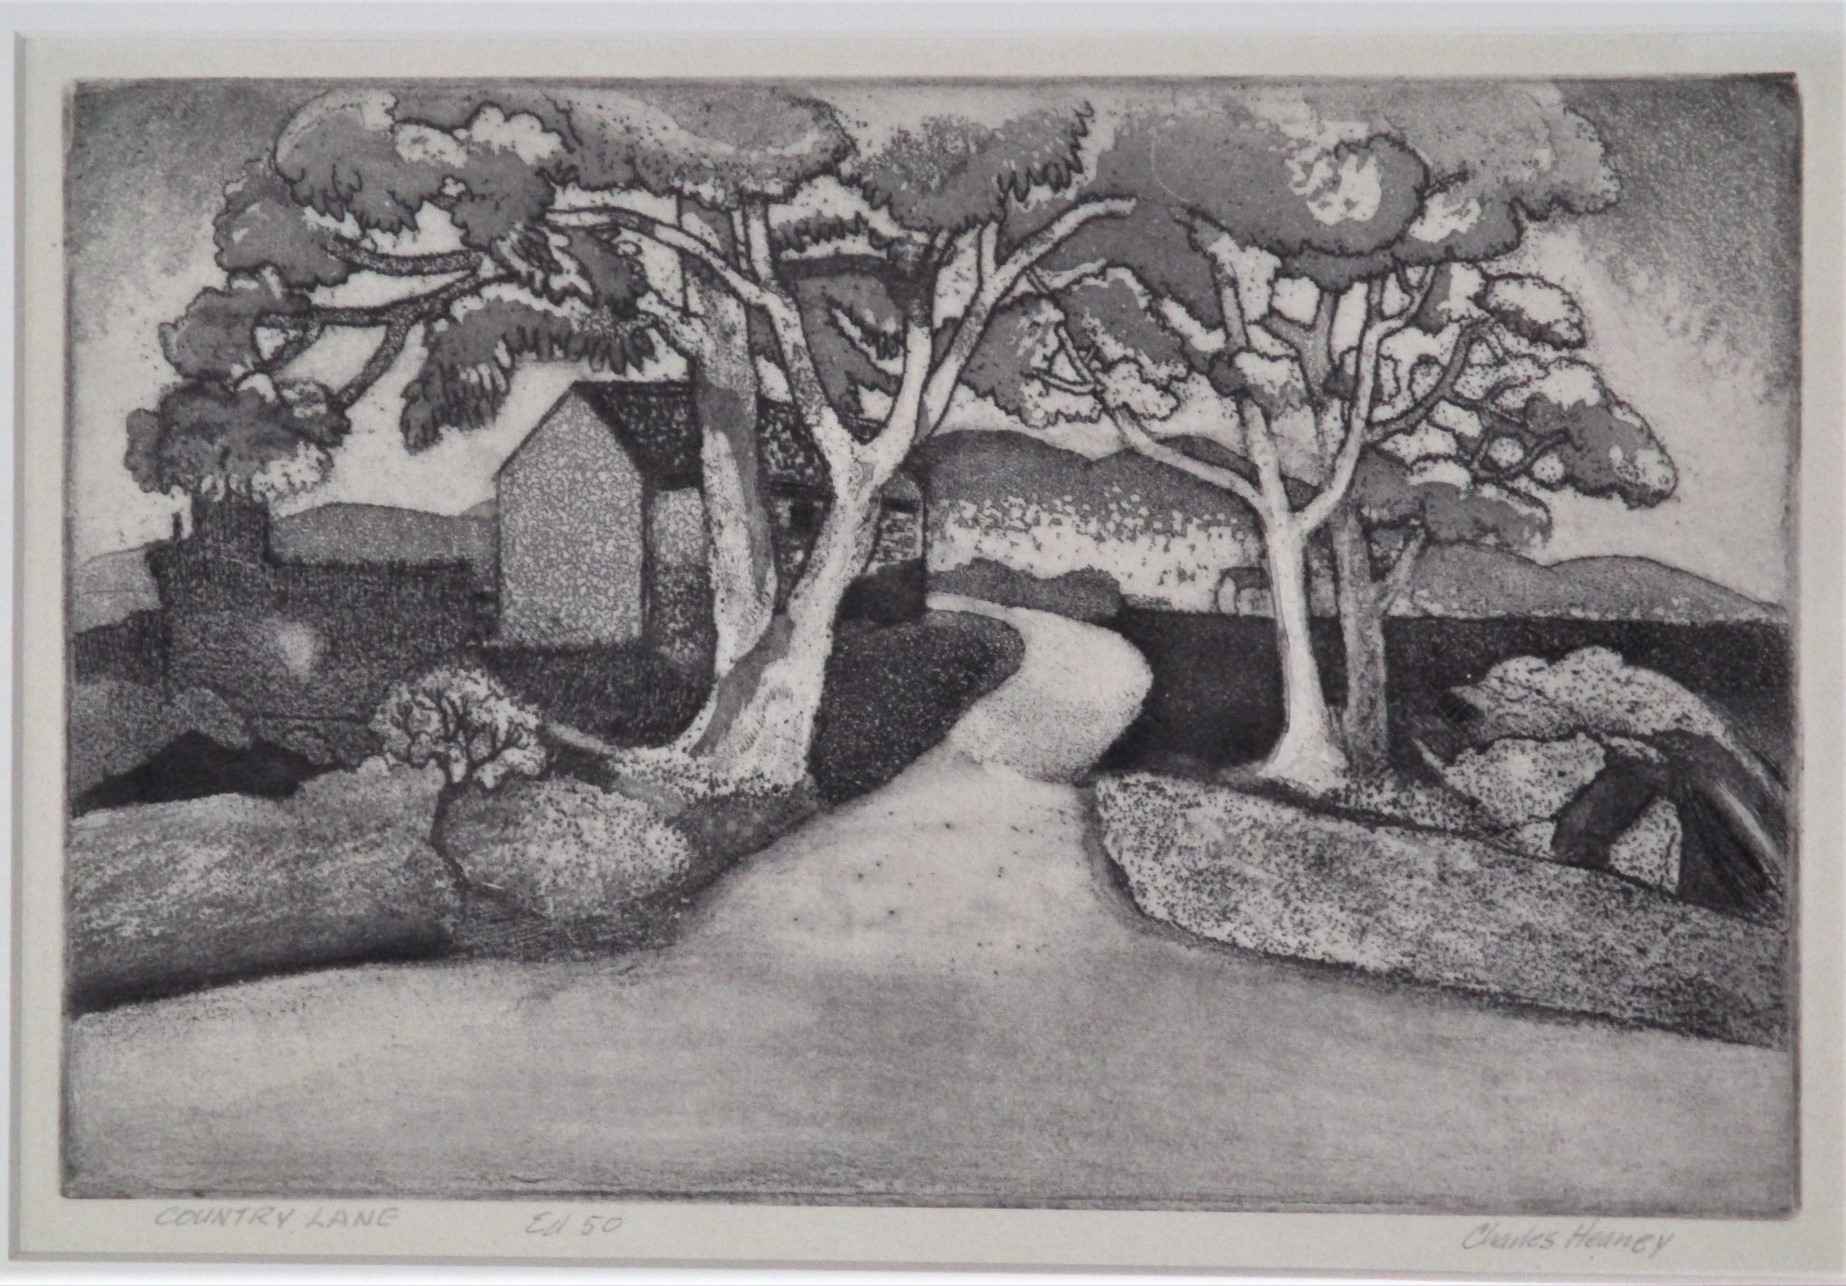 Country Lane by  Charles Heaney - Masterpiece Online